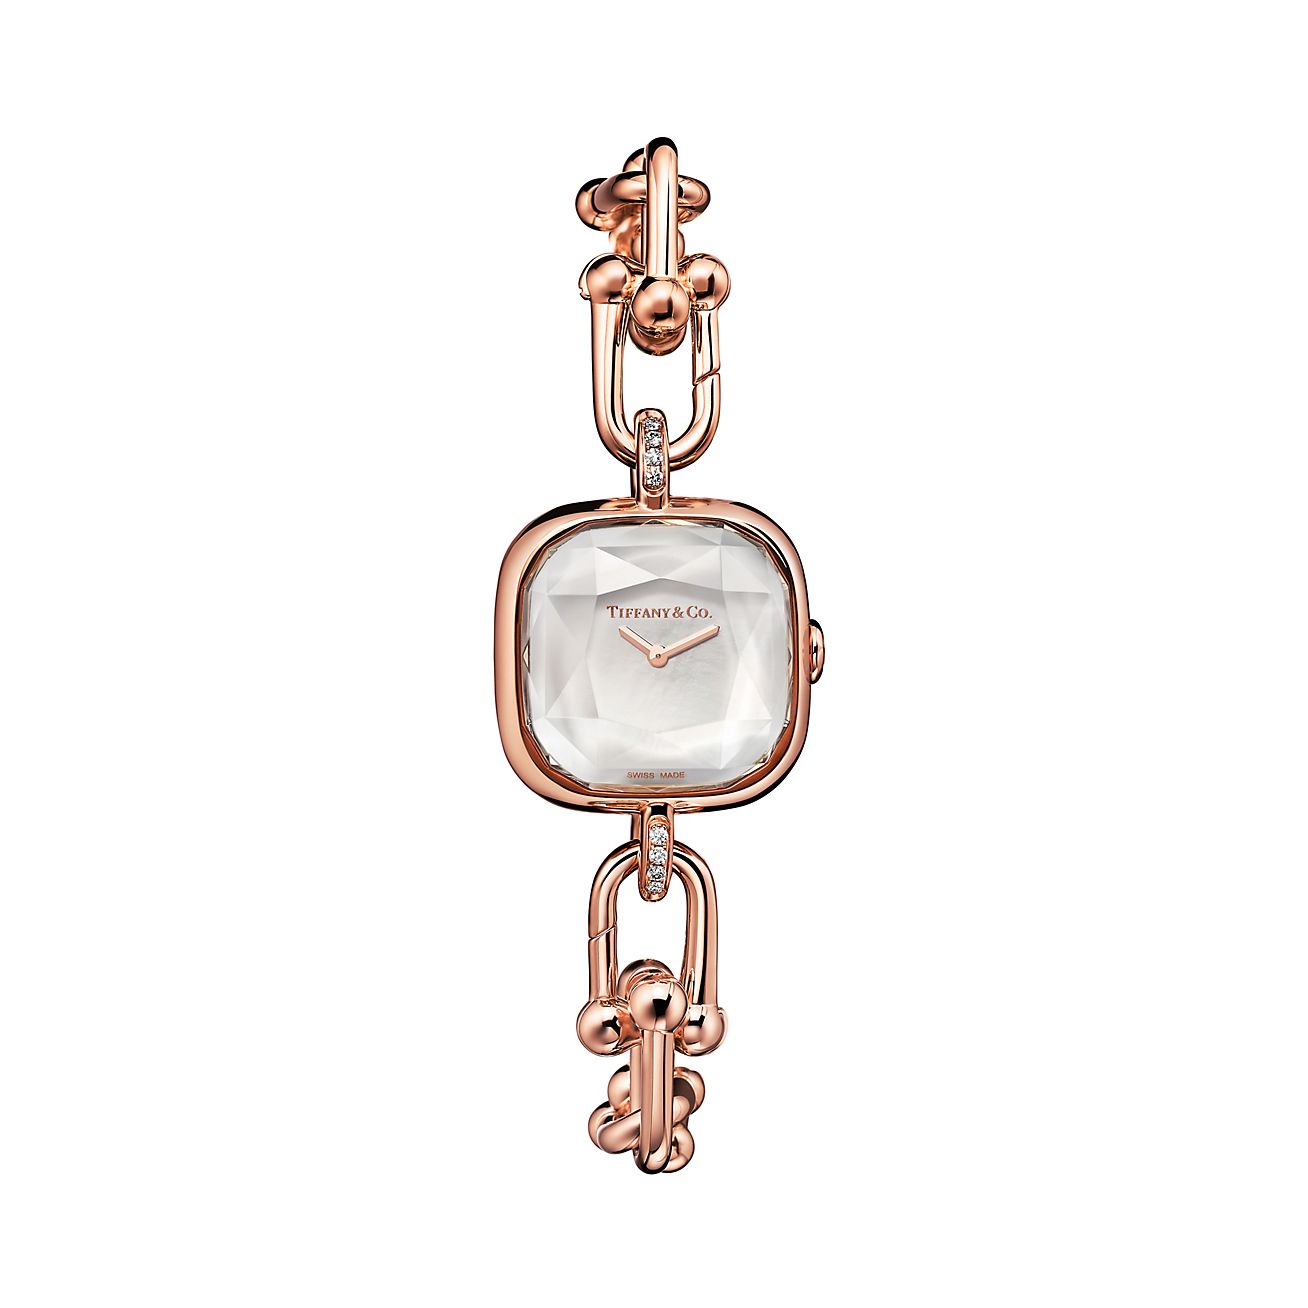 Tiffany HardWear Watch in Rose Gold with Pavé Diamonds and White Mother-of- pearl | Tiffany &